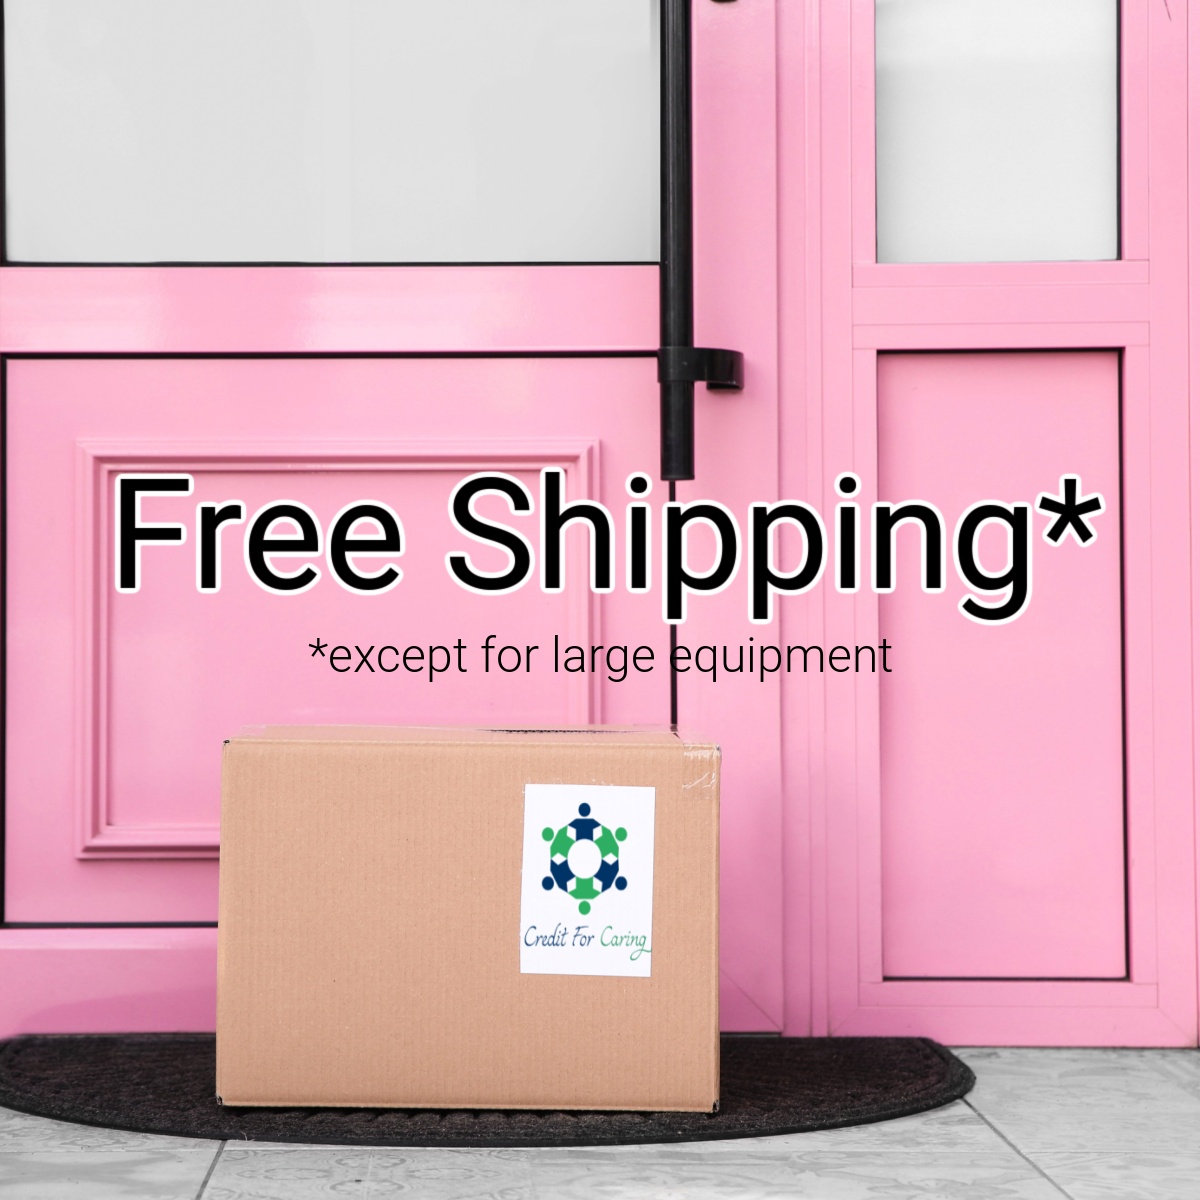 We offer free shipping on most orders. Fast free delivery